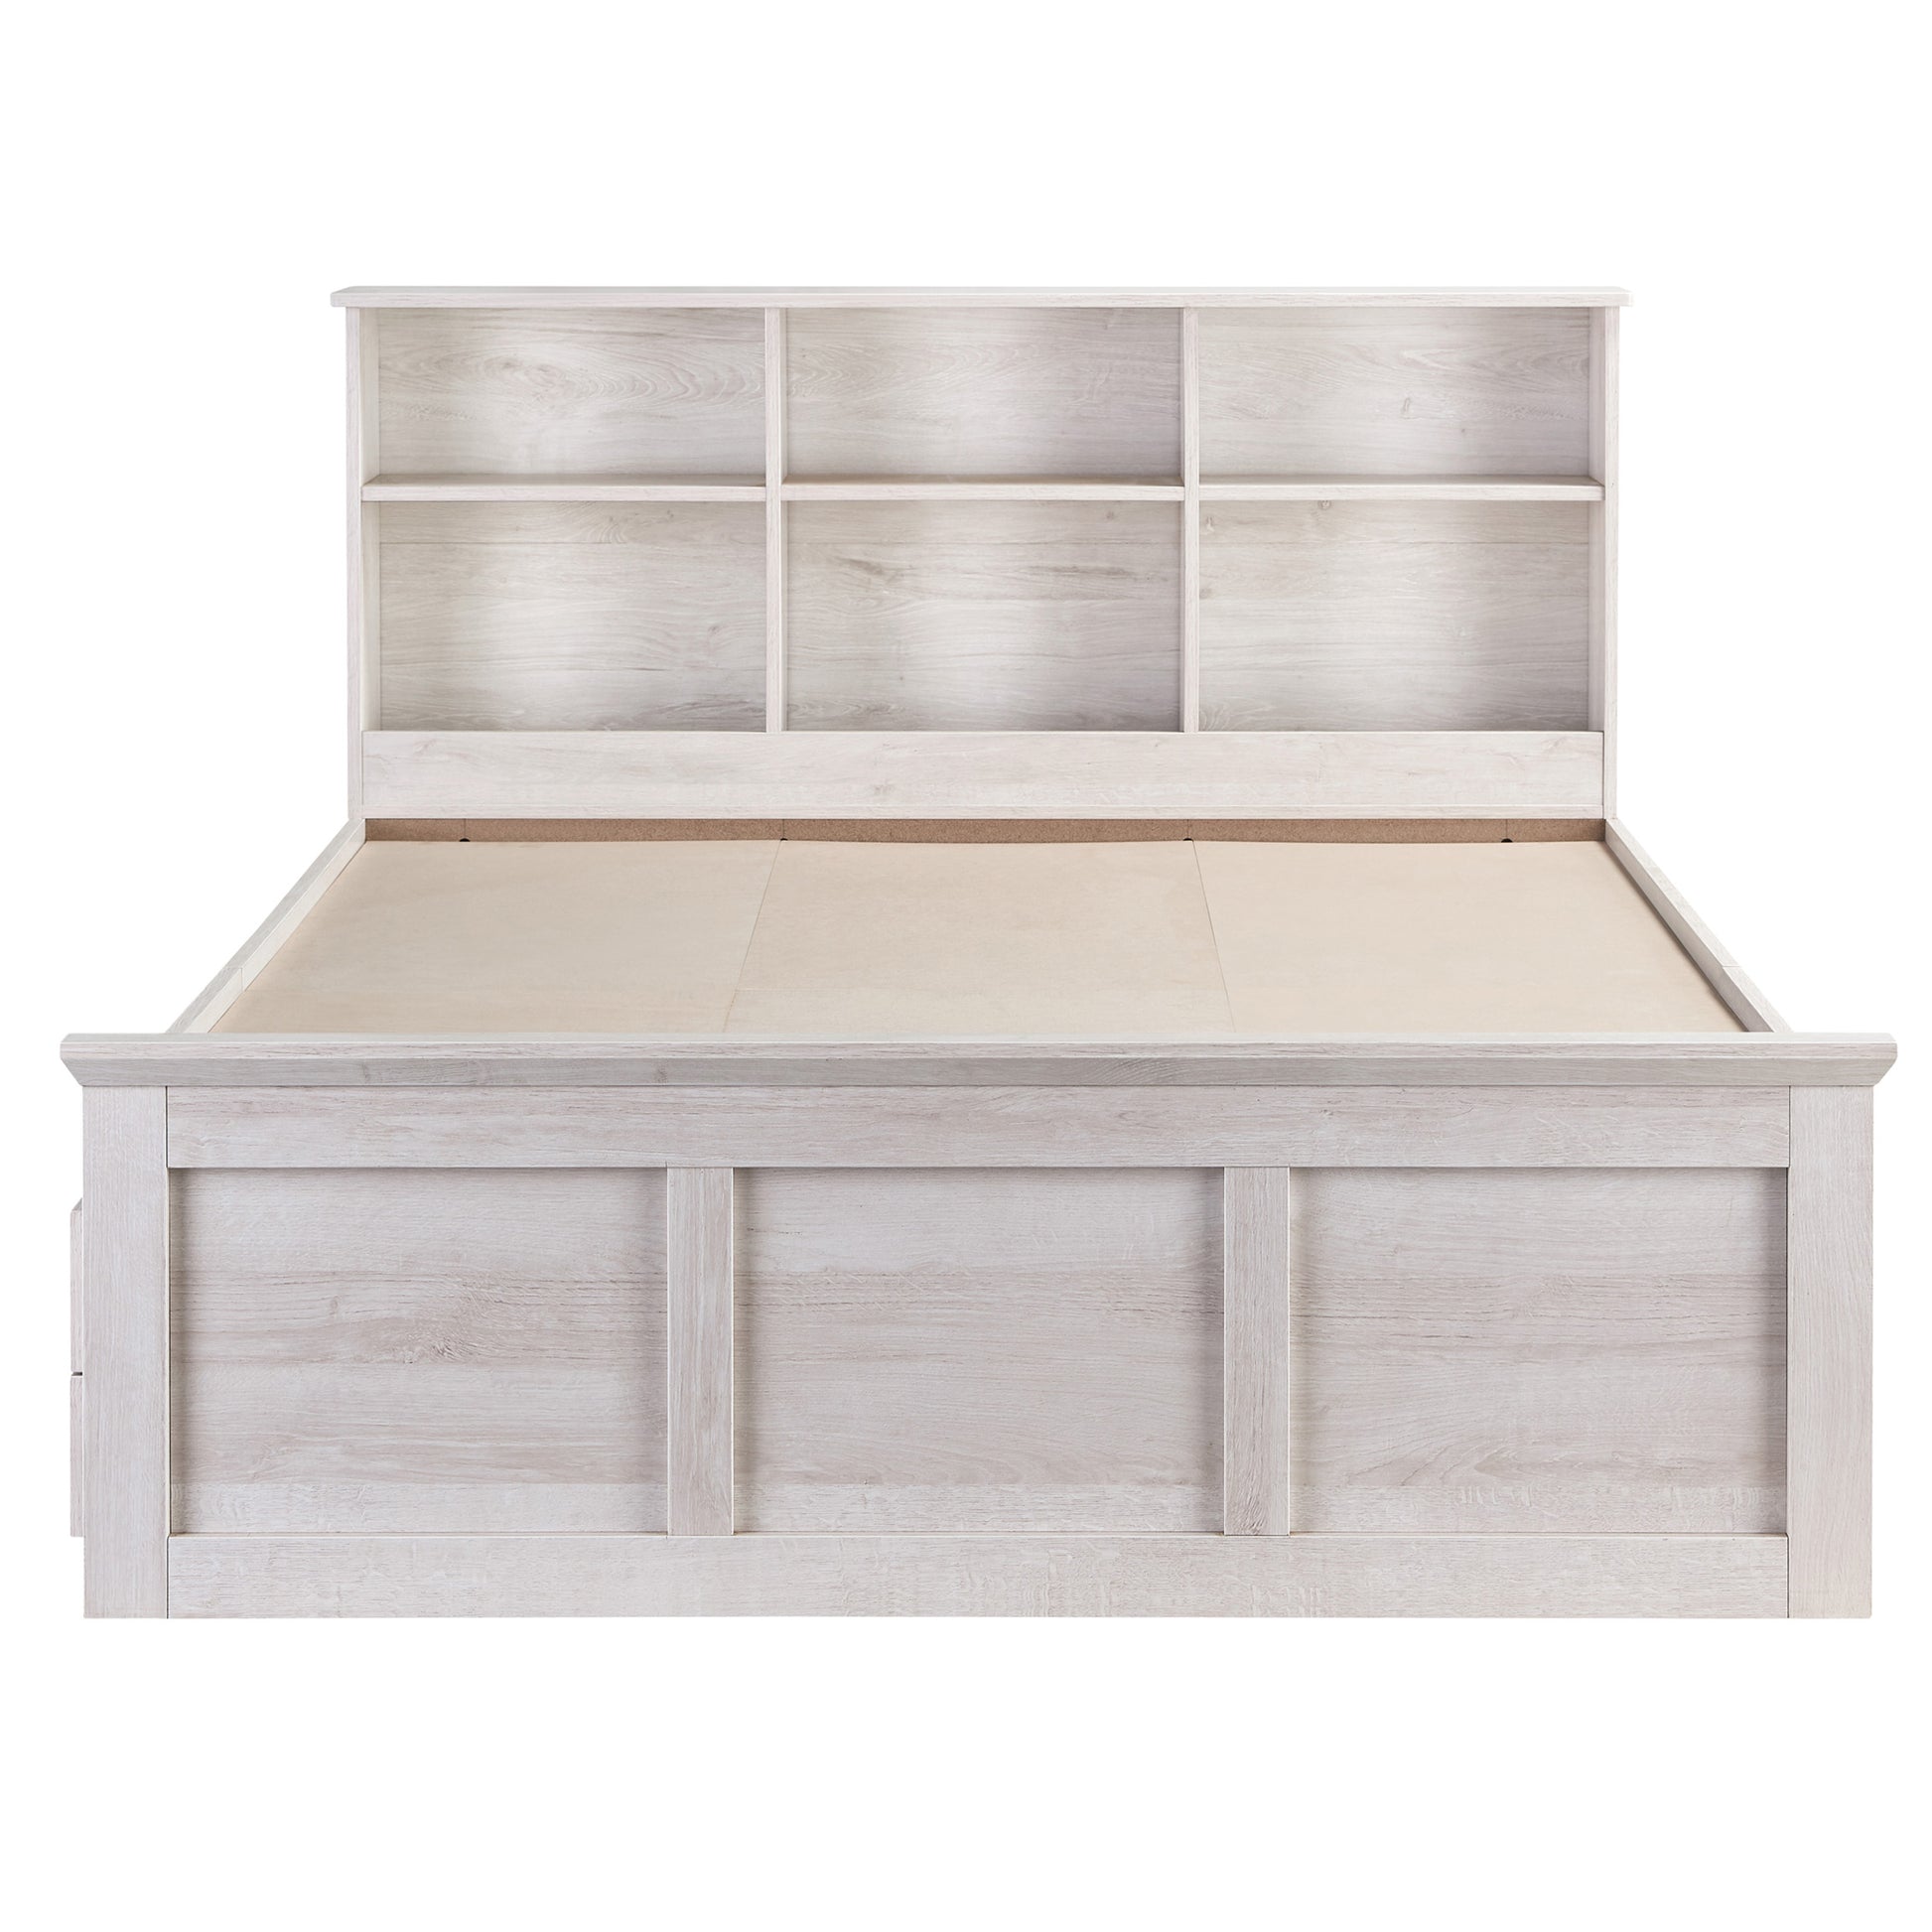 Front-facing transitional two-drawer four-shelf platform storage bed shown with optional headboard on a white background